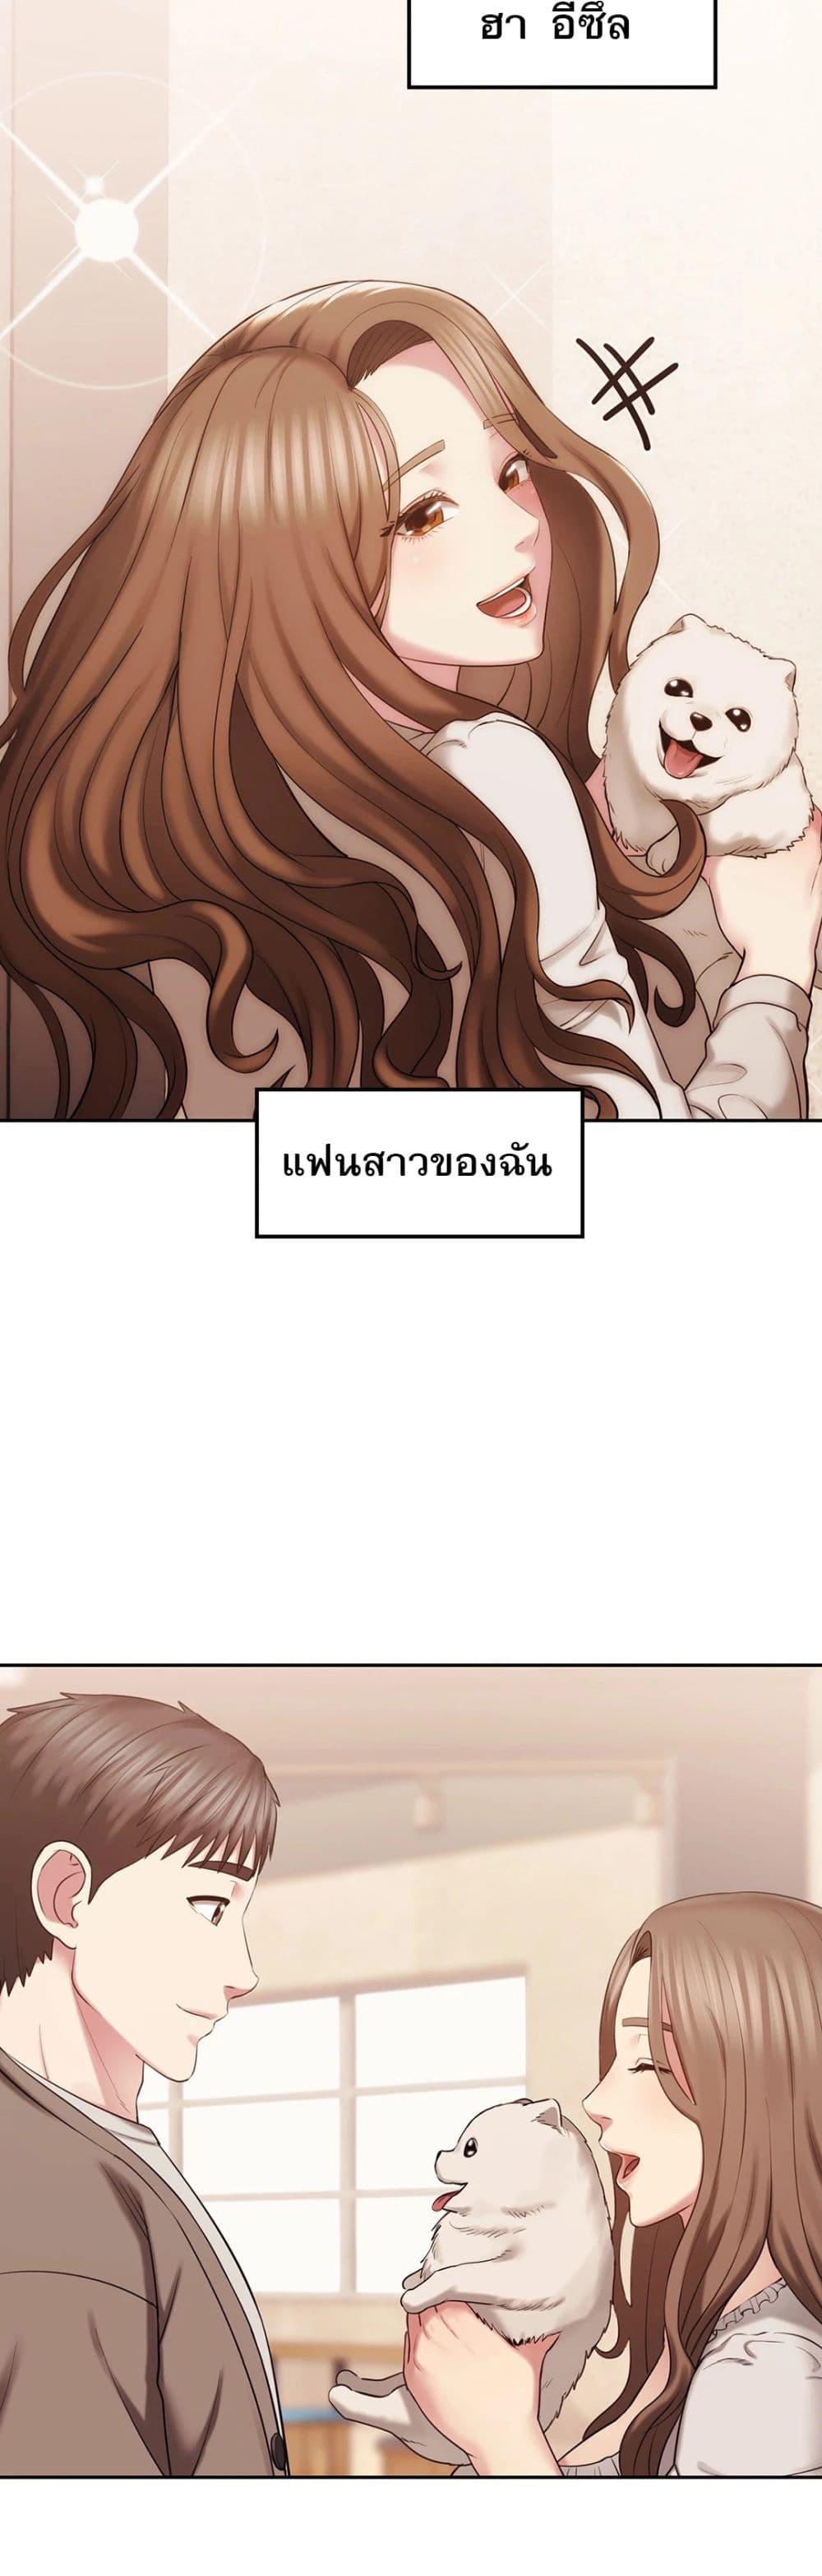 Sexual Consulting 1 ภาพ 8